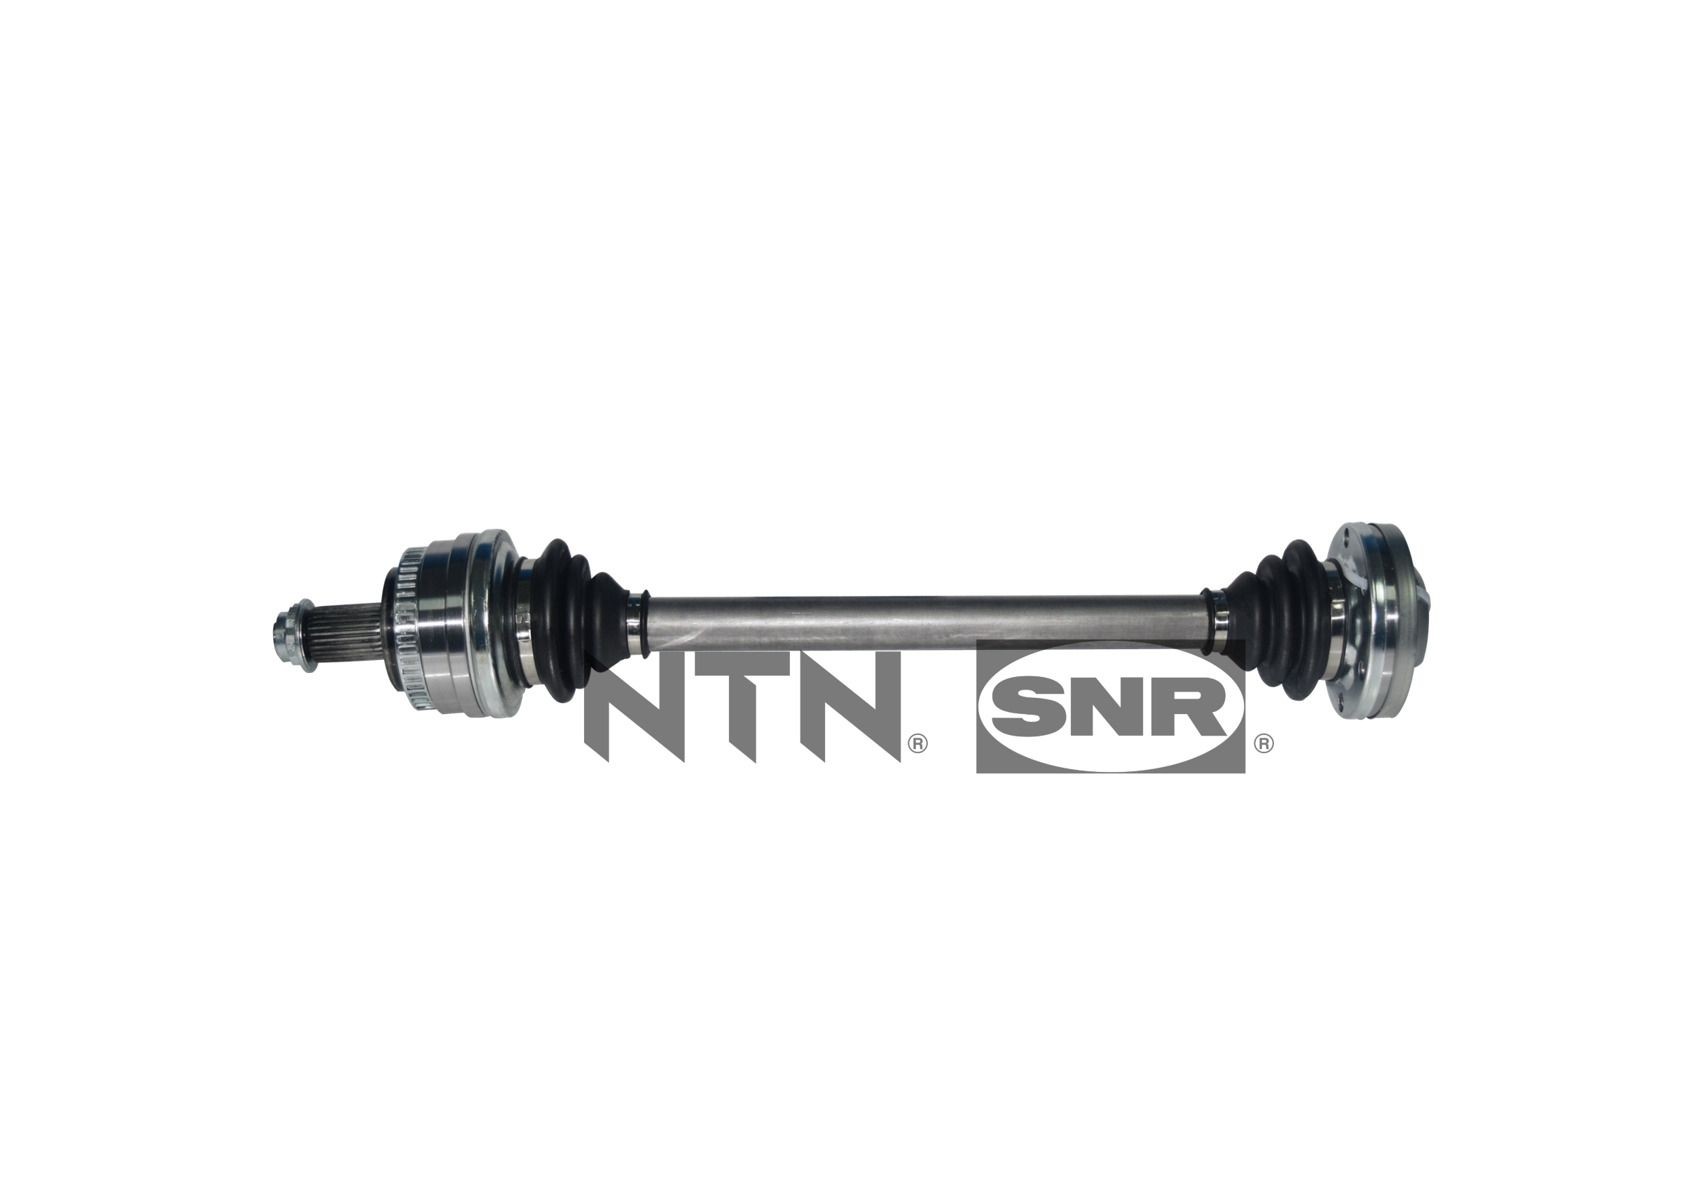 BMW Z4 Drive shaft and cv joint parts - Drive shaft SNR DK50.018